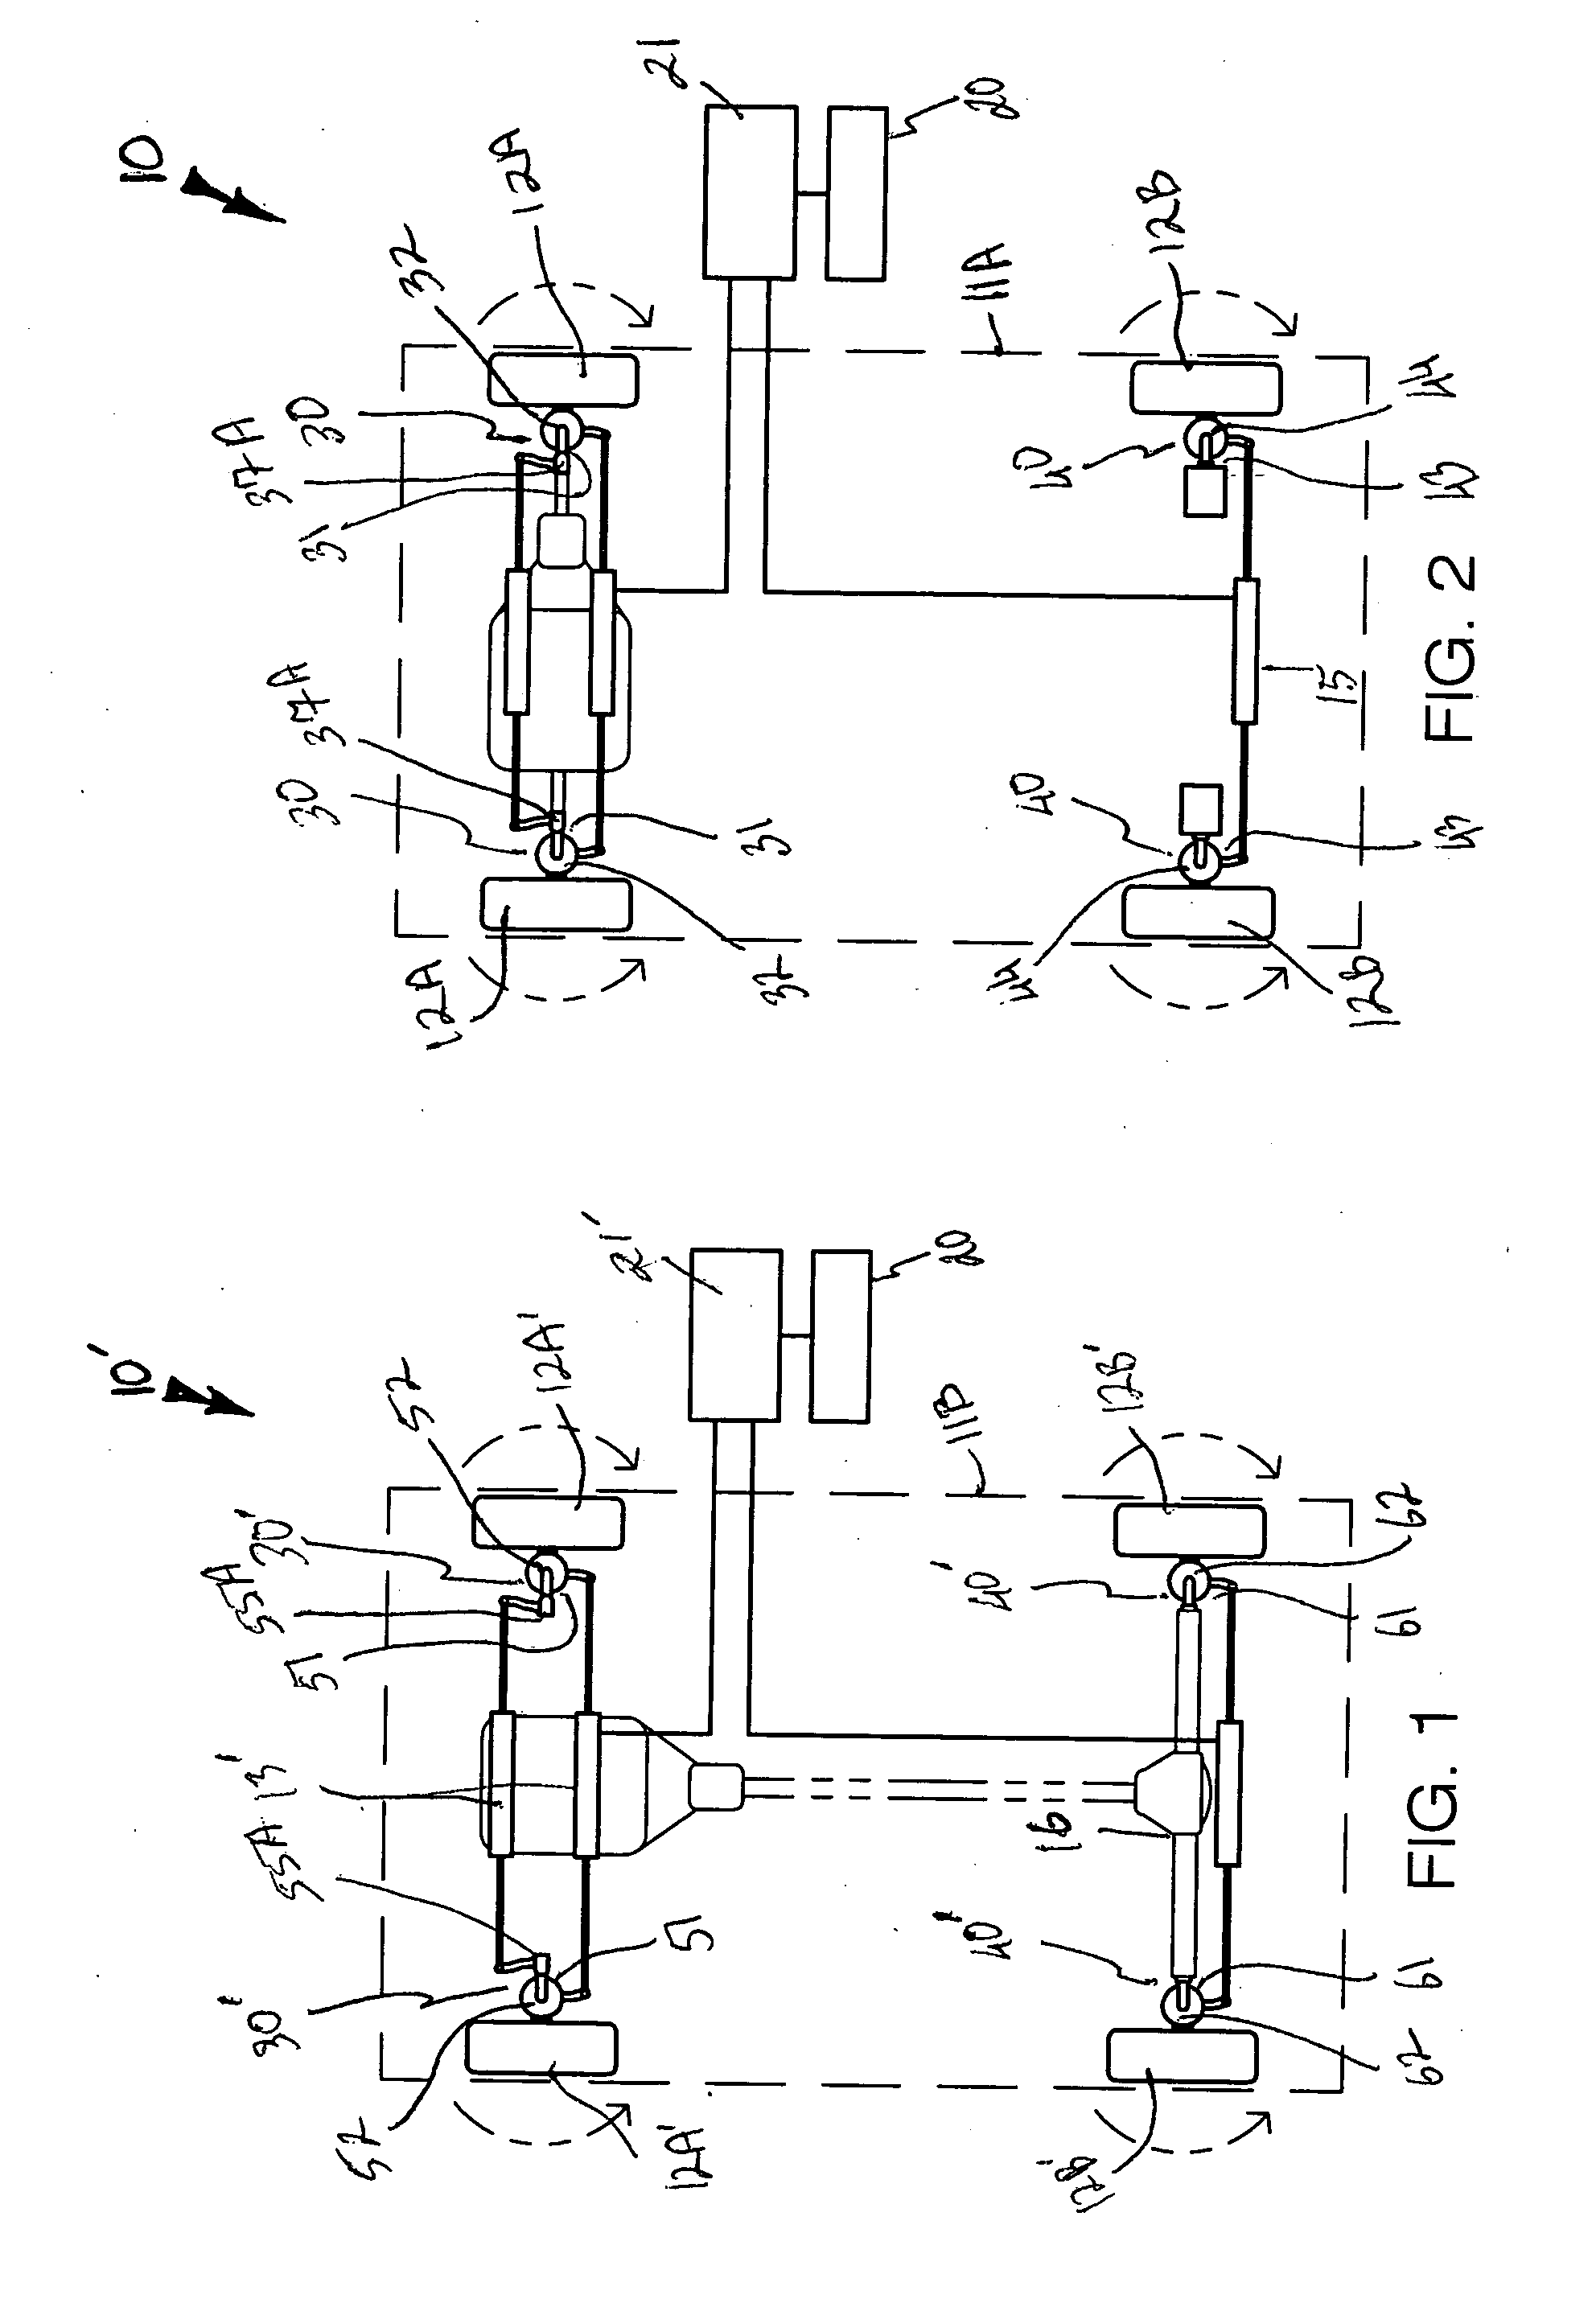 Auxiliary steering system for vehicles